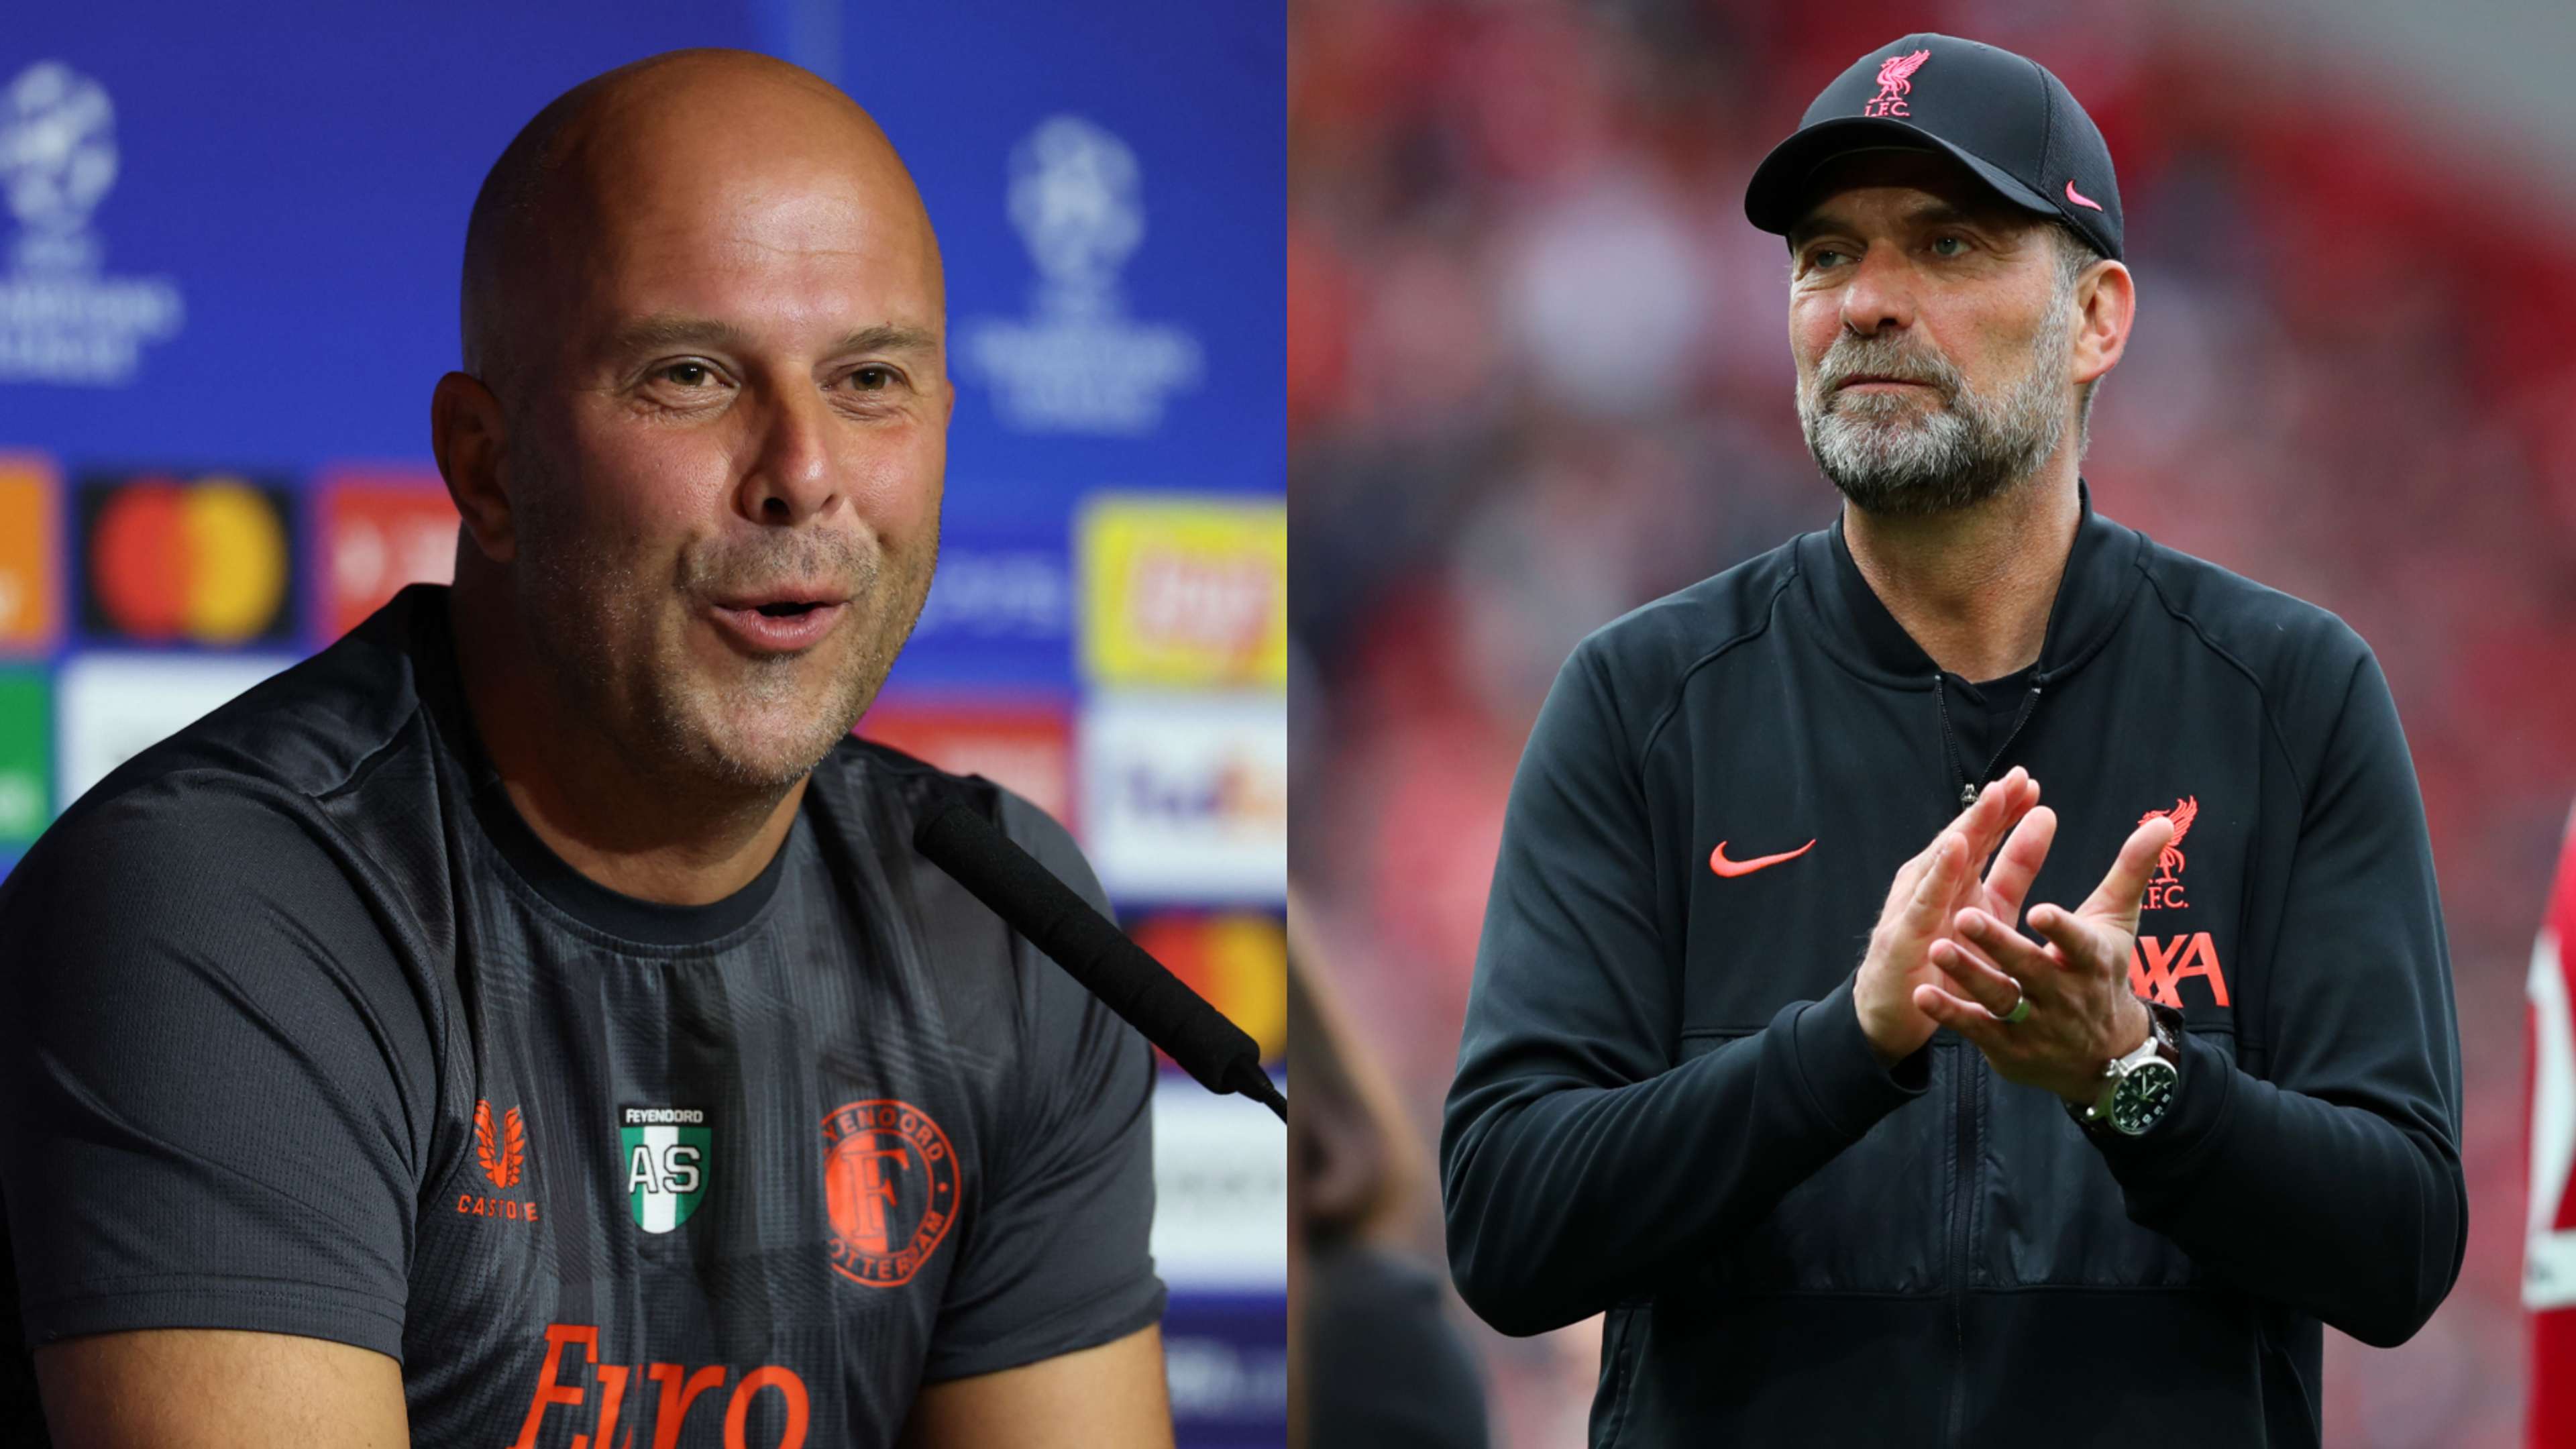 Outgoing Liverpool boss Jurgen Klopp gives 'nod of approval' to potential new Reds' boss Arne Slot.